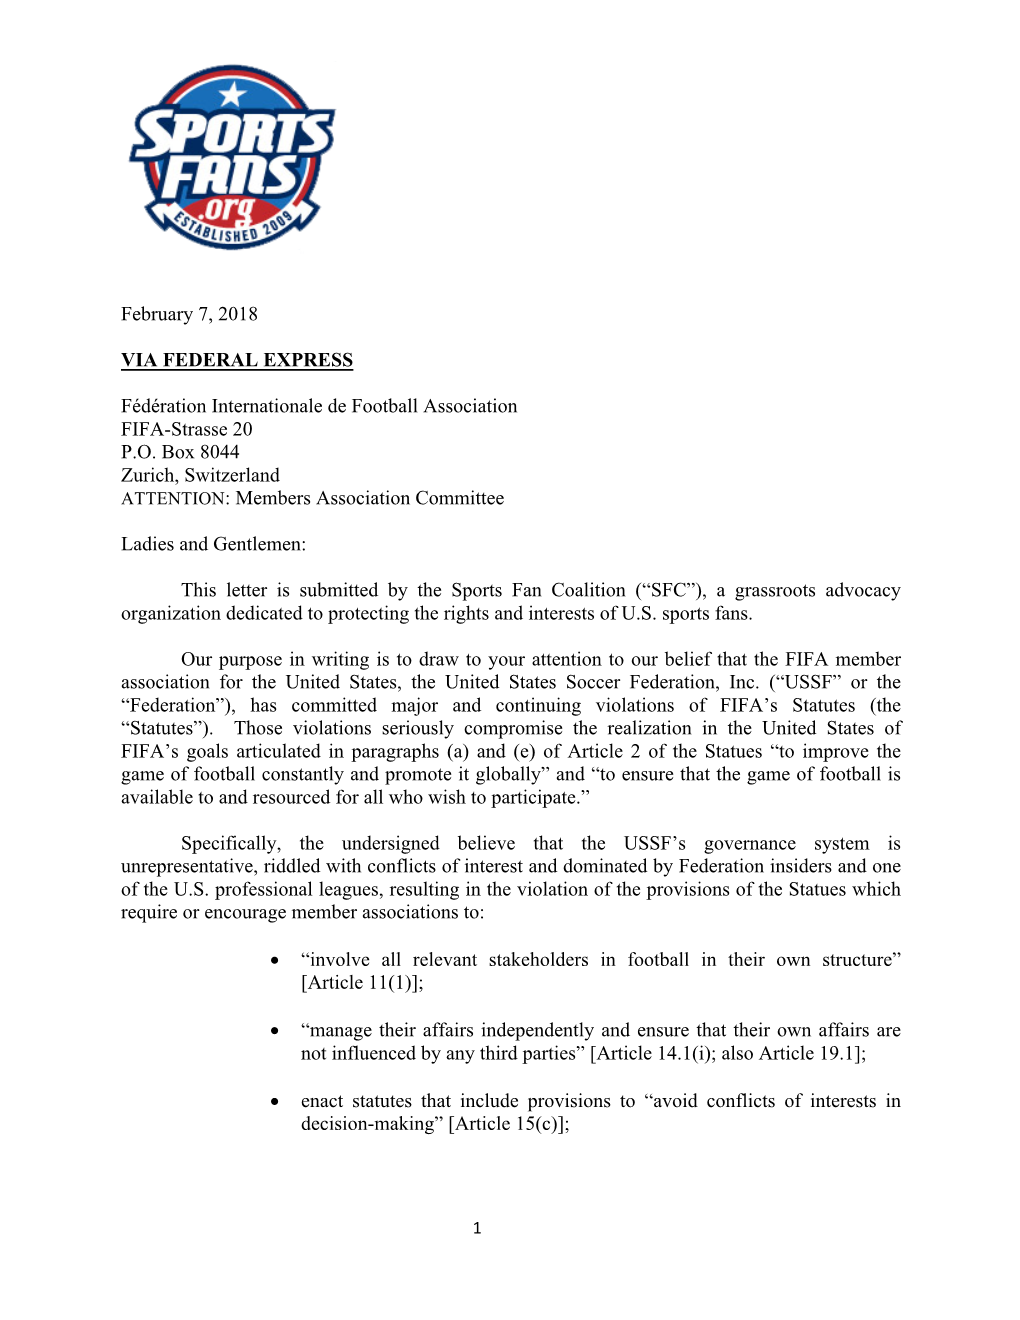 2018 02 07 FIFA Letter Re Governance of USSF FINAL